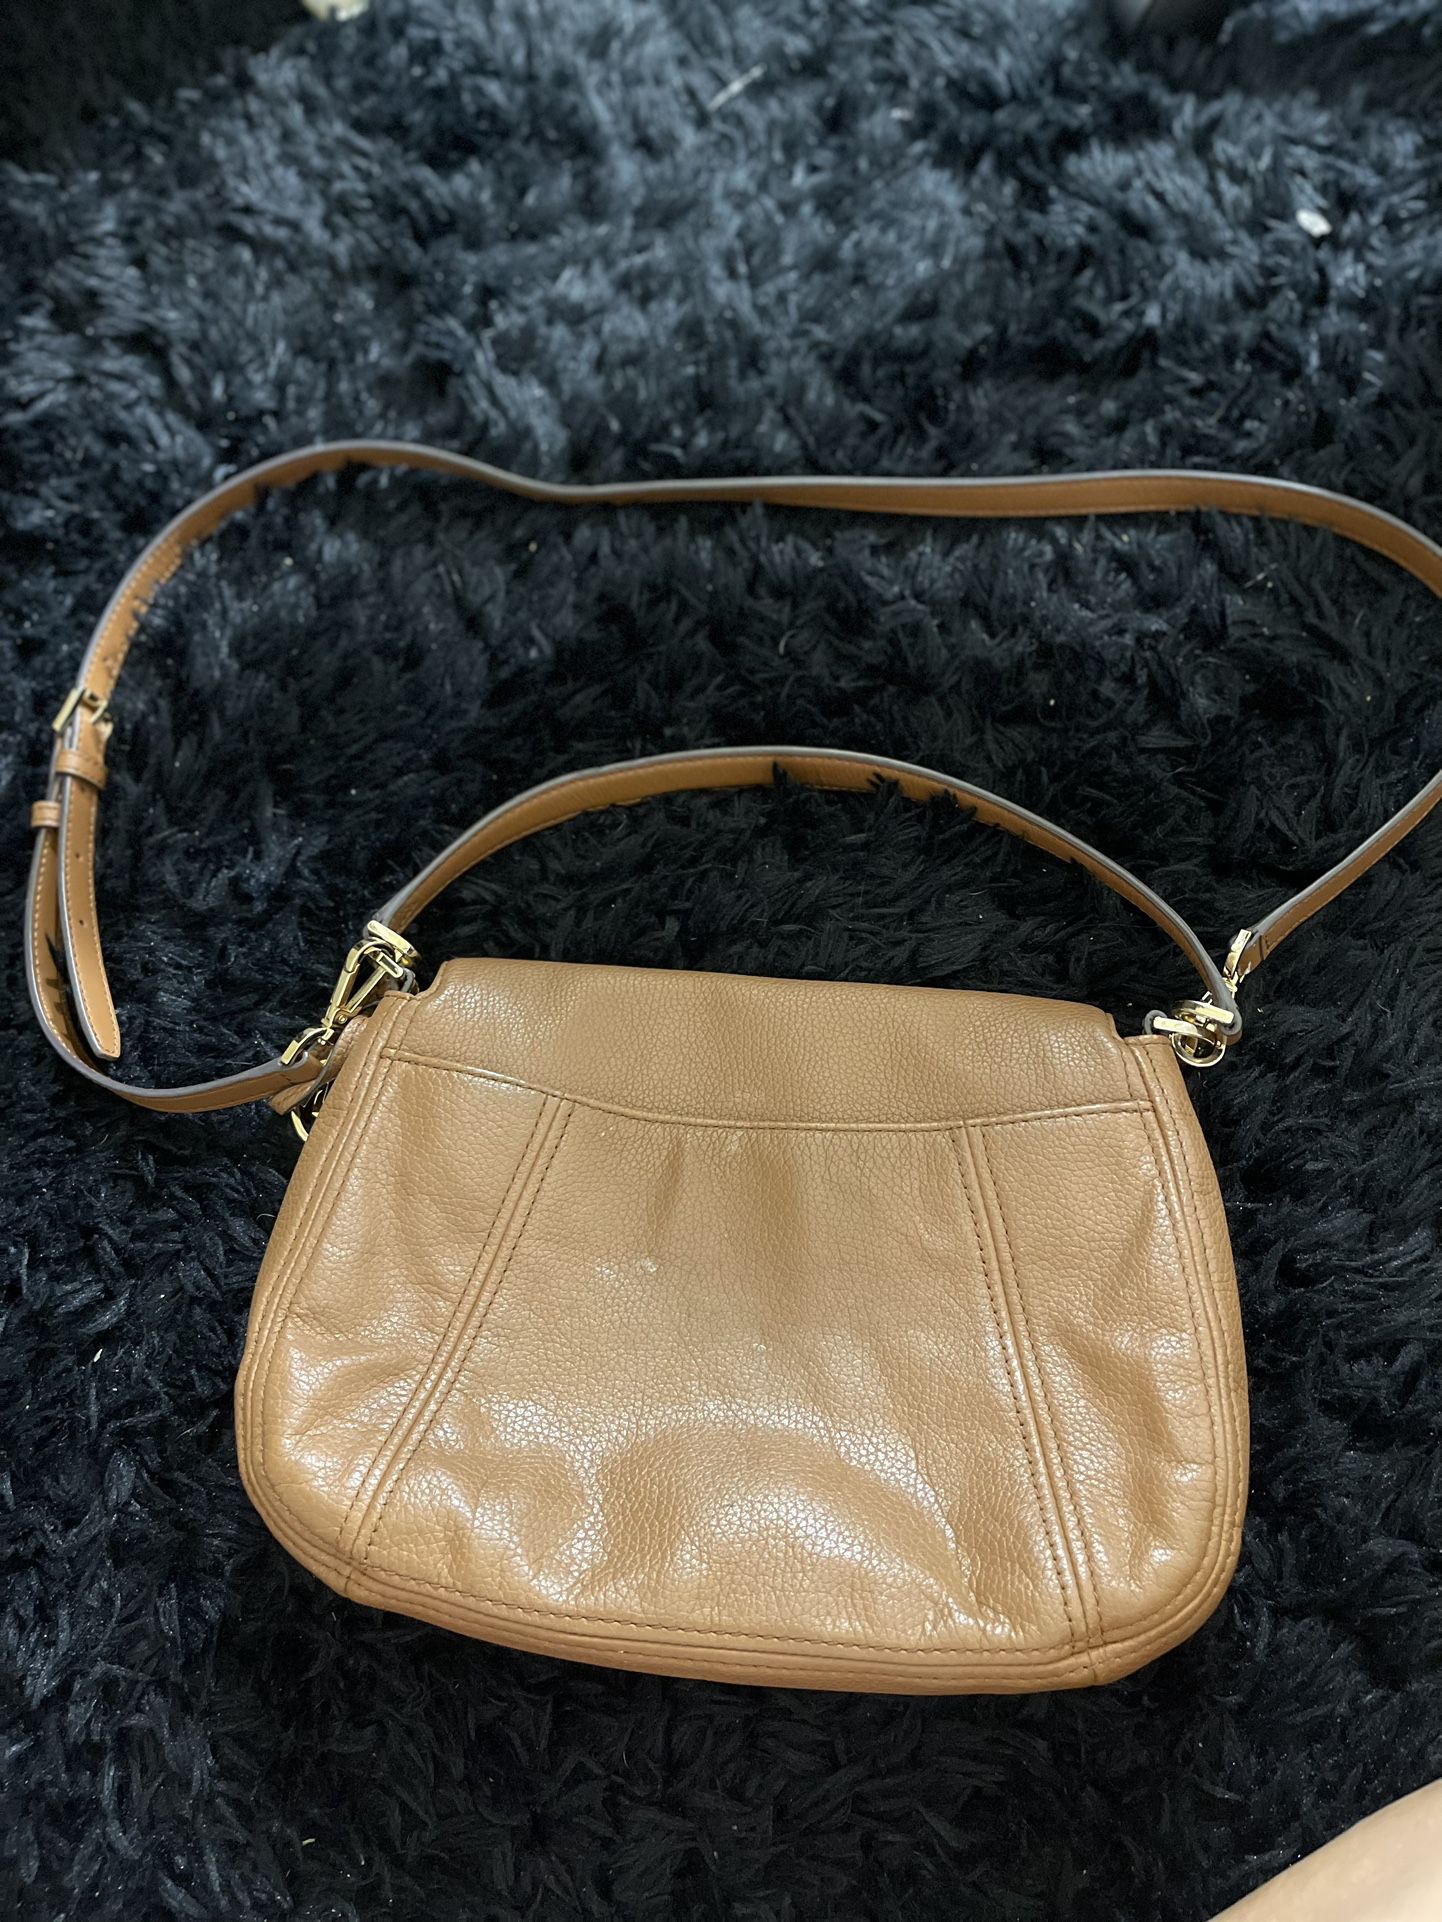 Michael Kors Purse BARELY TOUCHED 